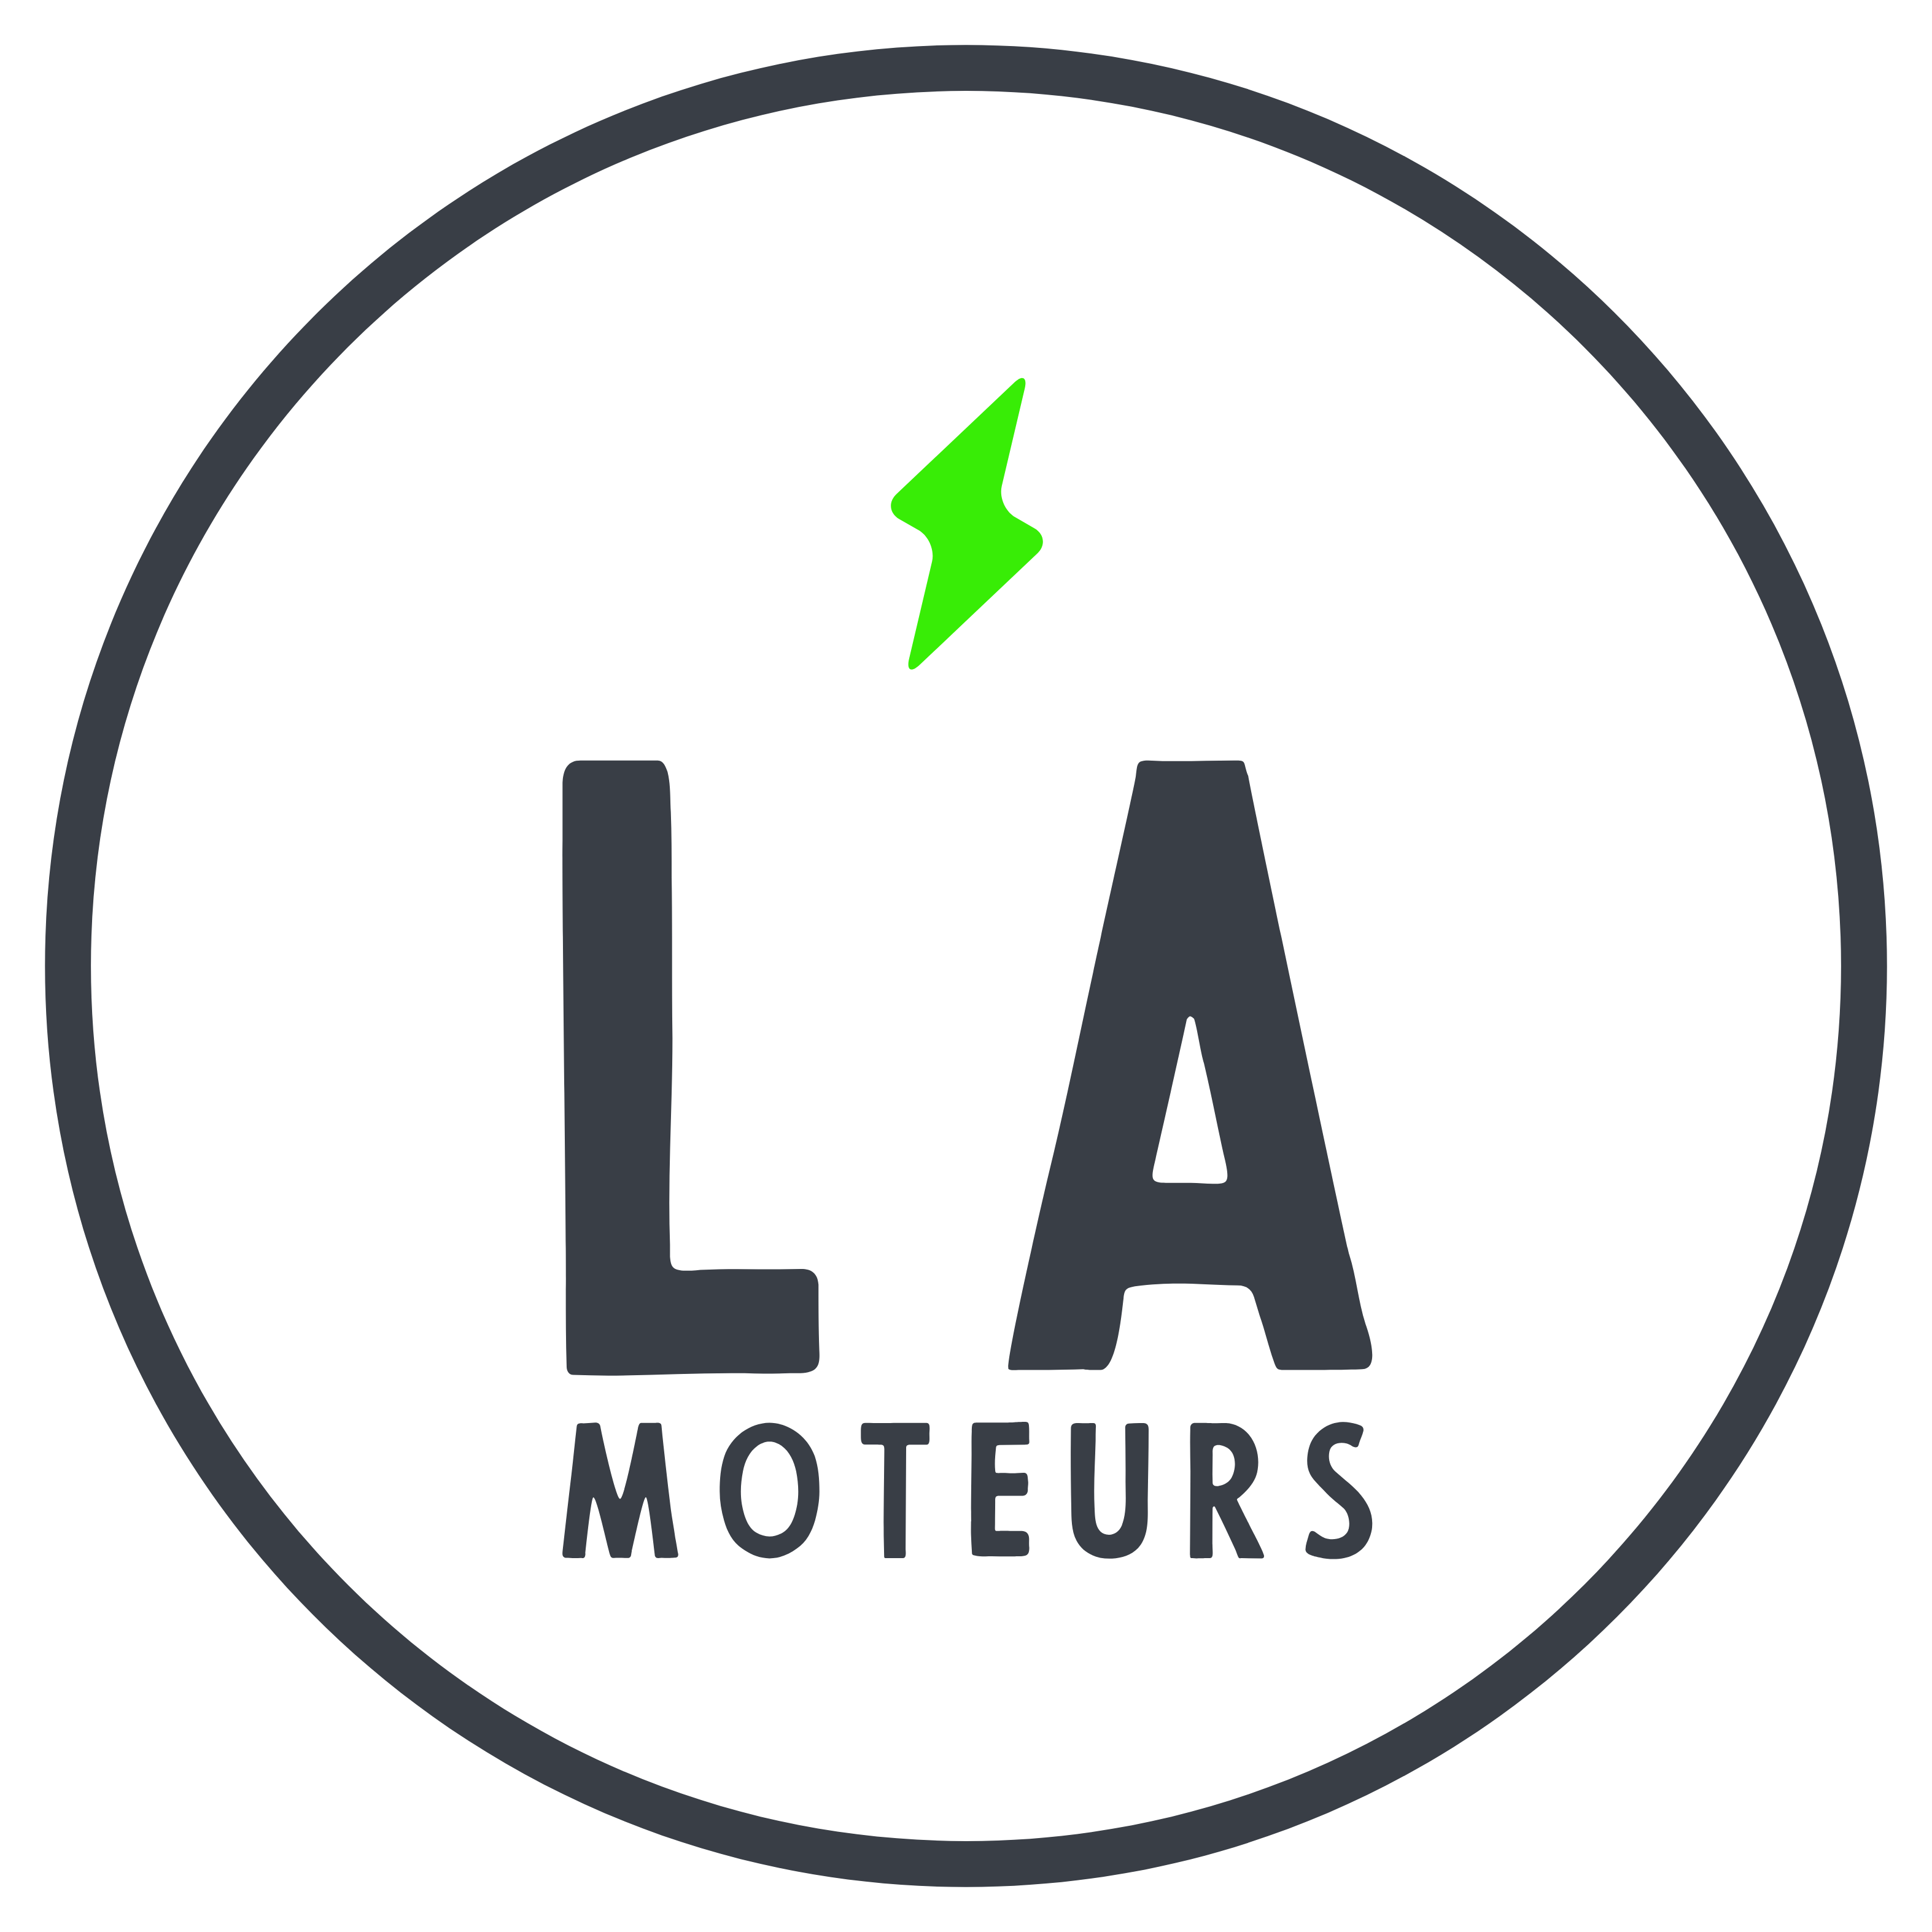 L.A. MOTEURS | Used Car Dealership in Santa Clarita, CA serving all over San Fernando Valley, Antelope Valley, Los Angeles & Orange County. We Finance All Credit. Good or Bad.